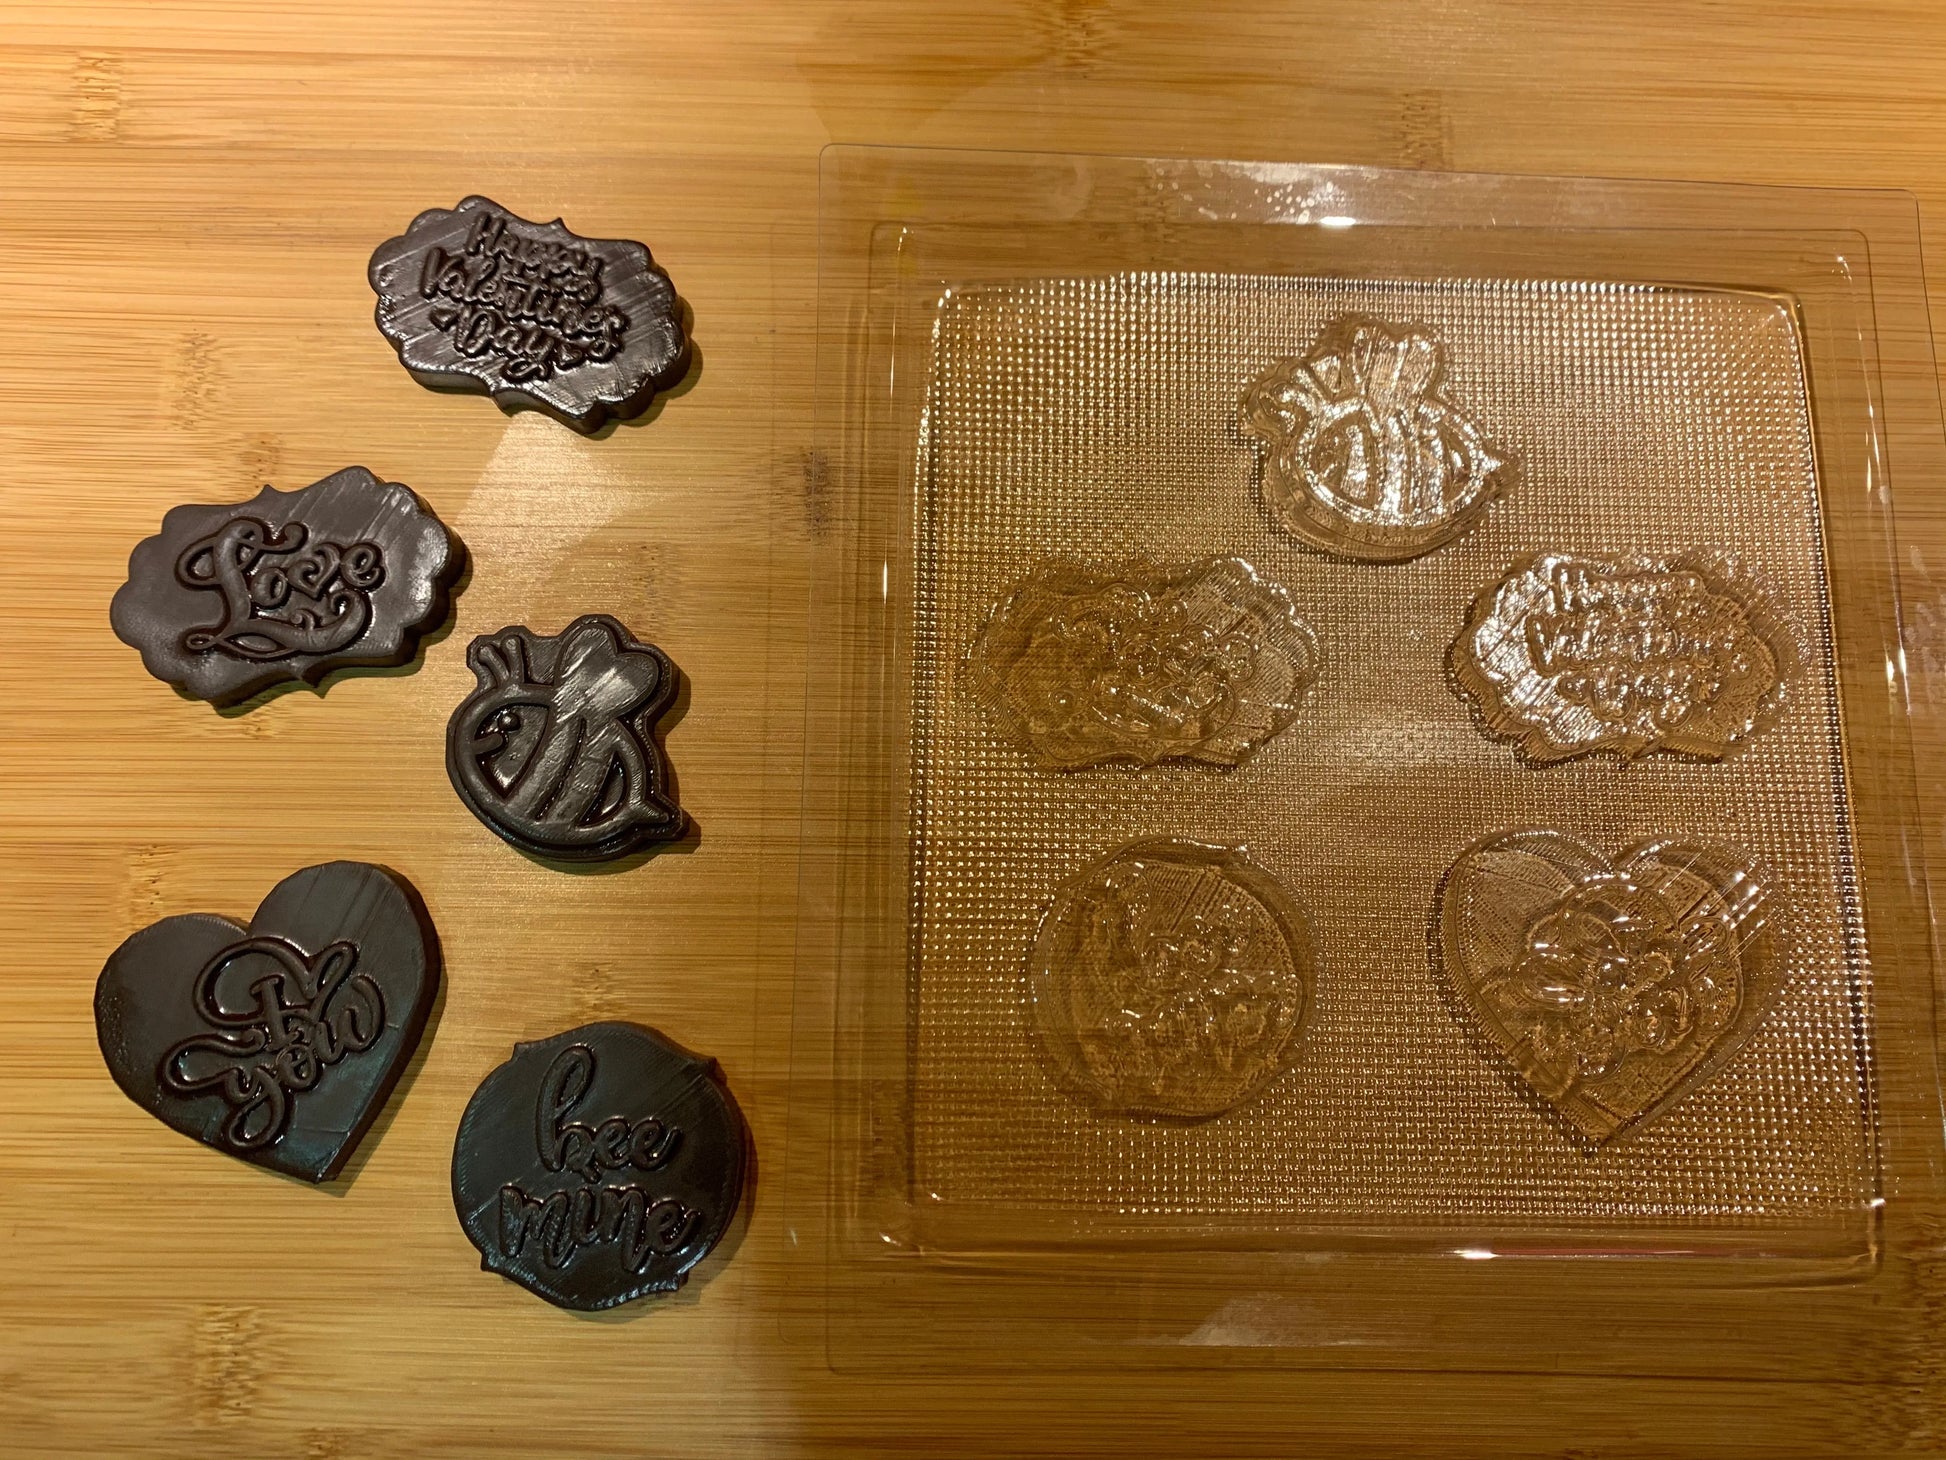 St. valentine - Chocolate mould - Love Chocolates MEG cookie cutters